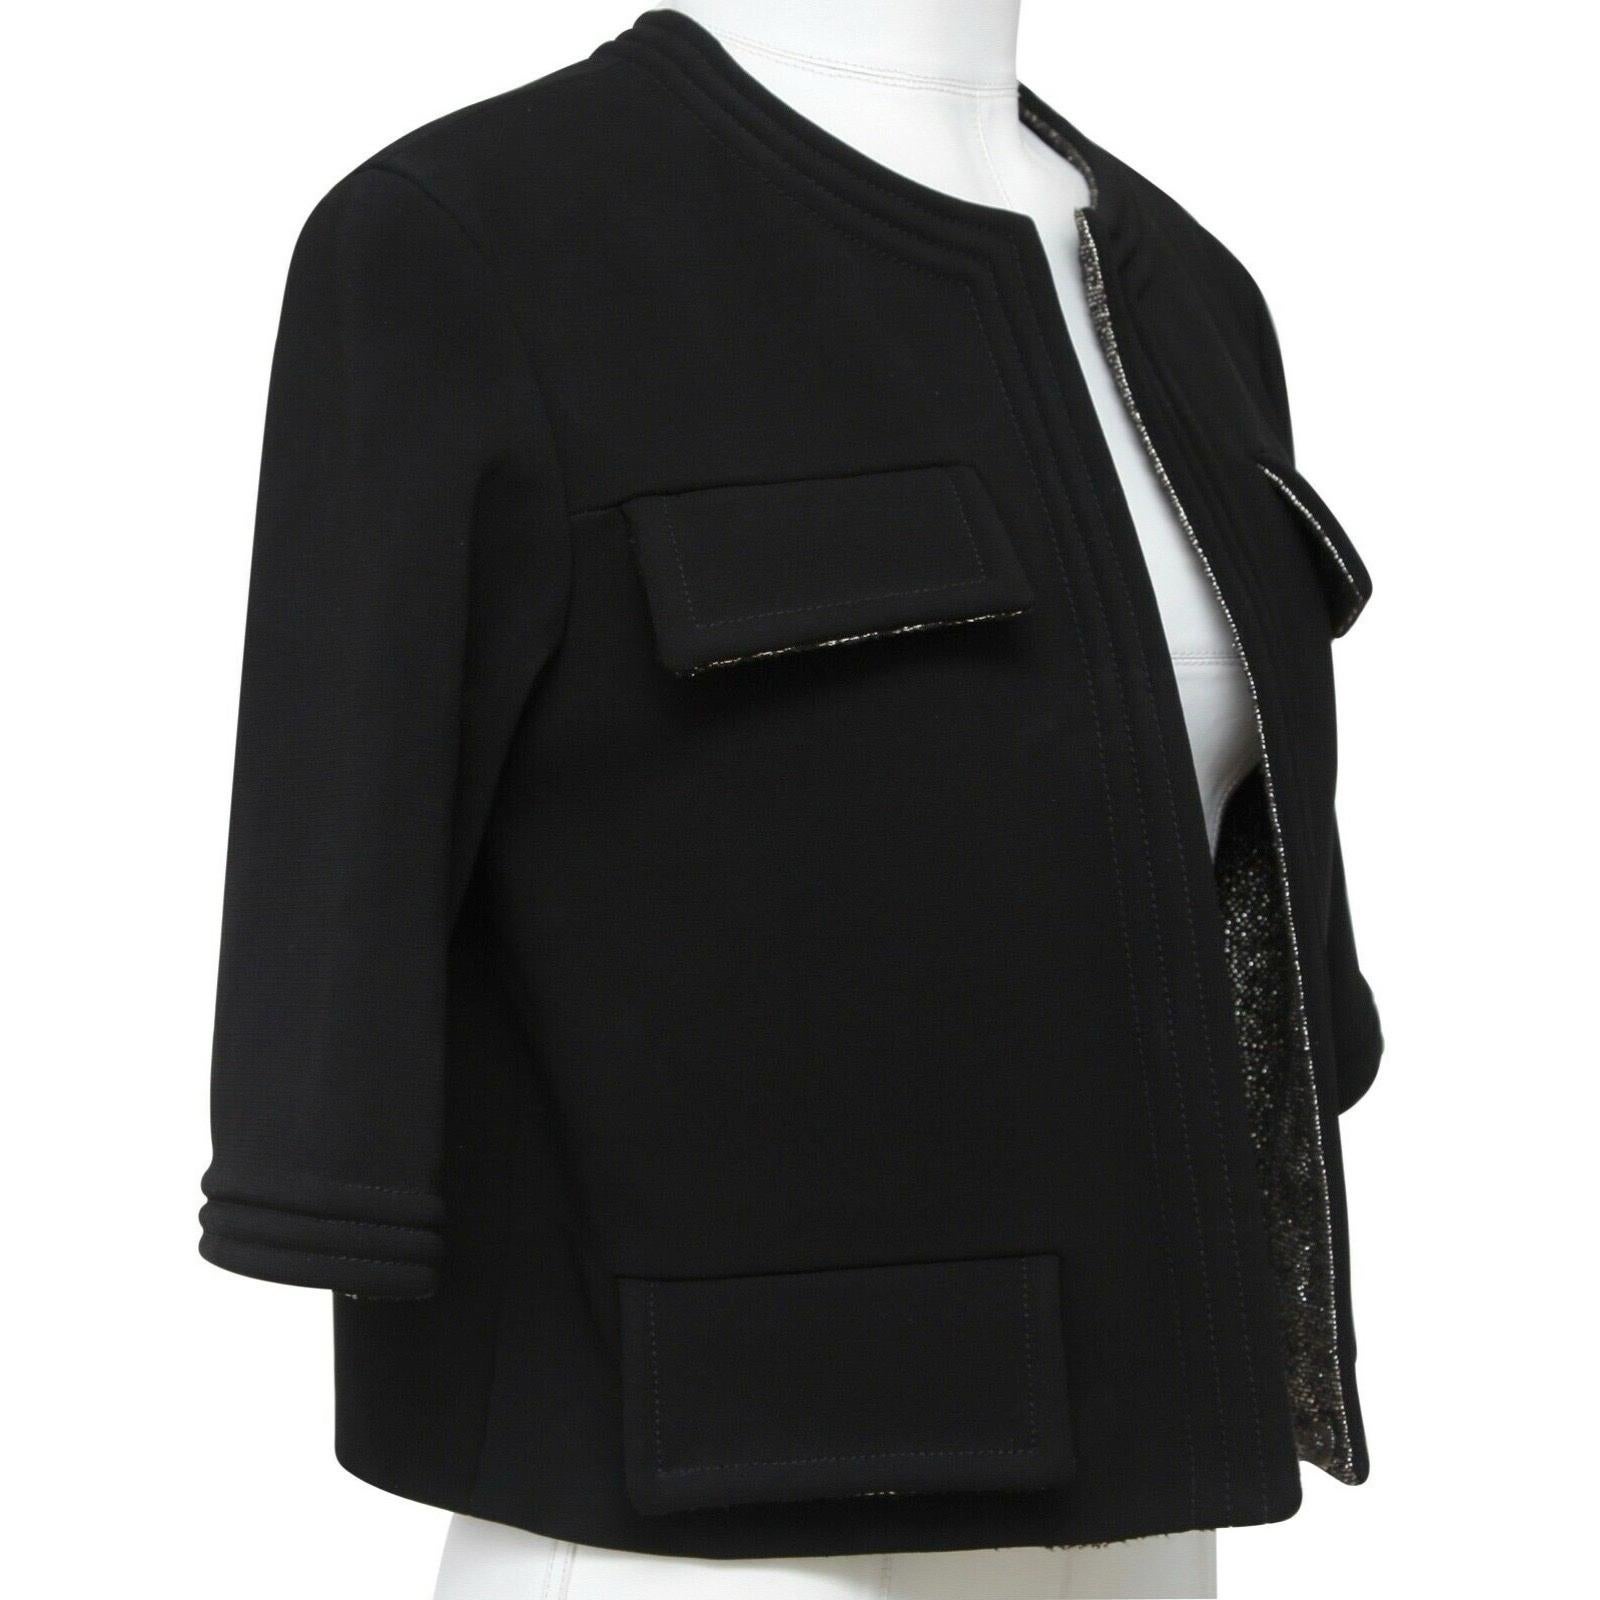 GUARANTEED AUTHENTIC RUNWAY FALL 2012 CHANEL BLACK CROPPED JACKET


Design:
- Chanel black cropped jacket.
- Open front.
- Crew neckline.
- Four faux pockets at front.
- Short sleeve.
- Metallic lining.
- Signature chain at hem.

Fabric: 96%